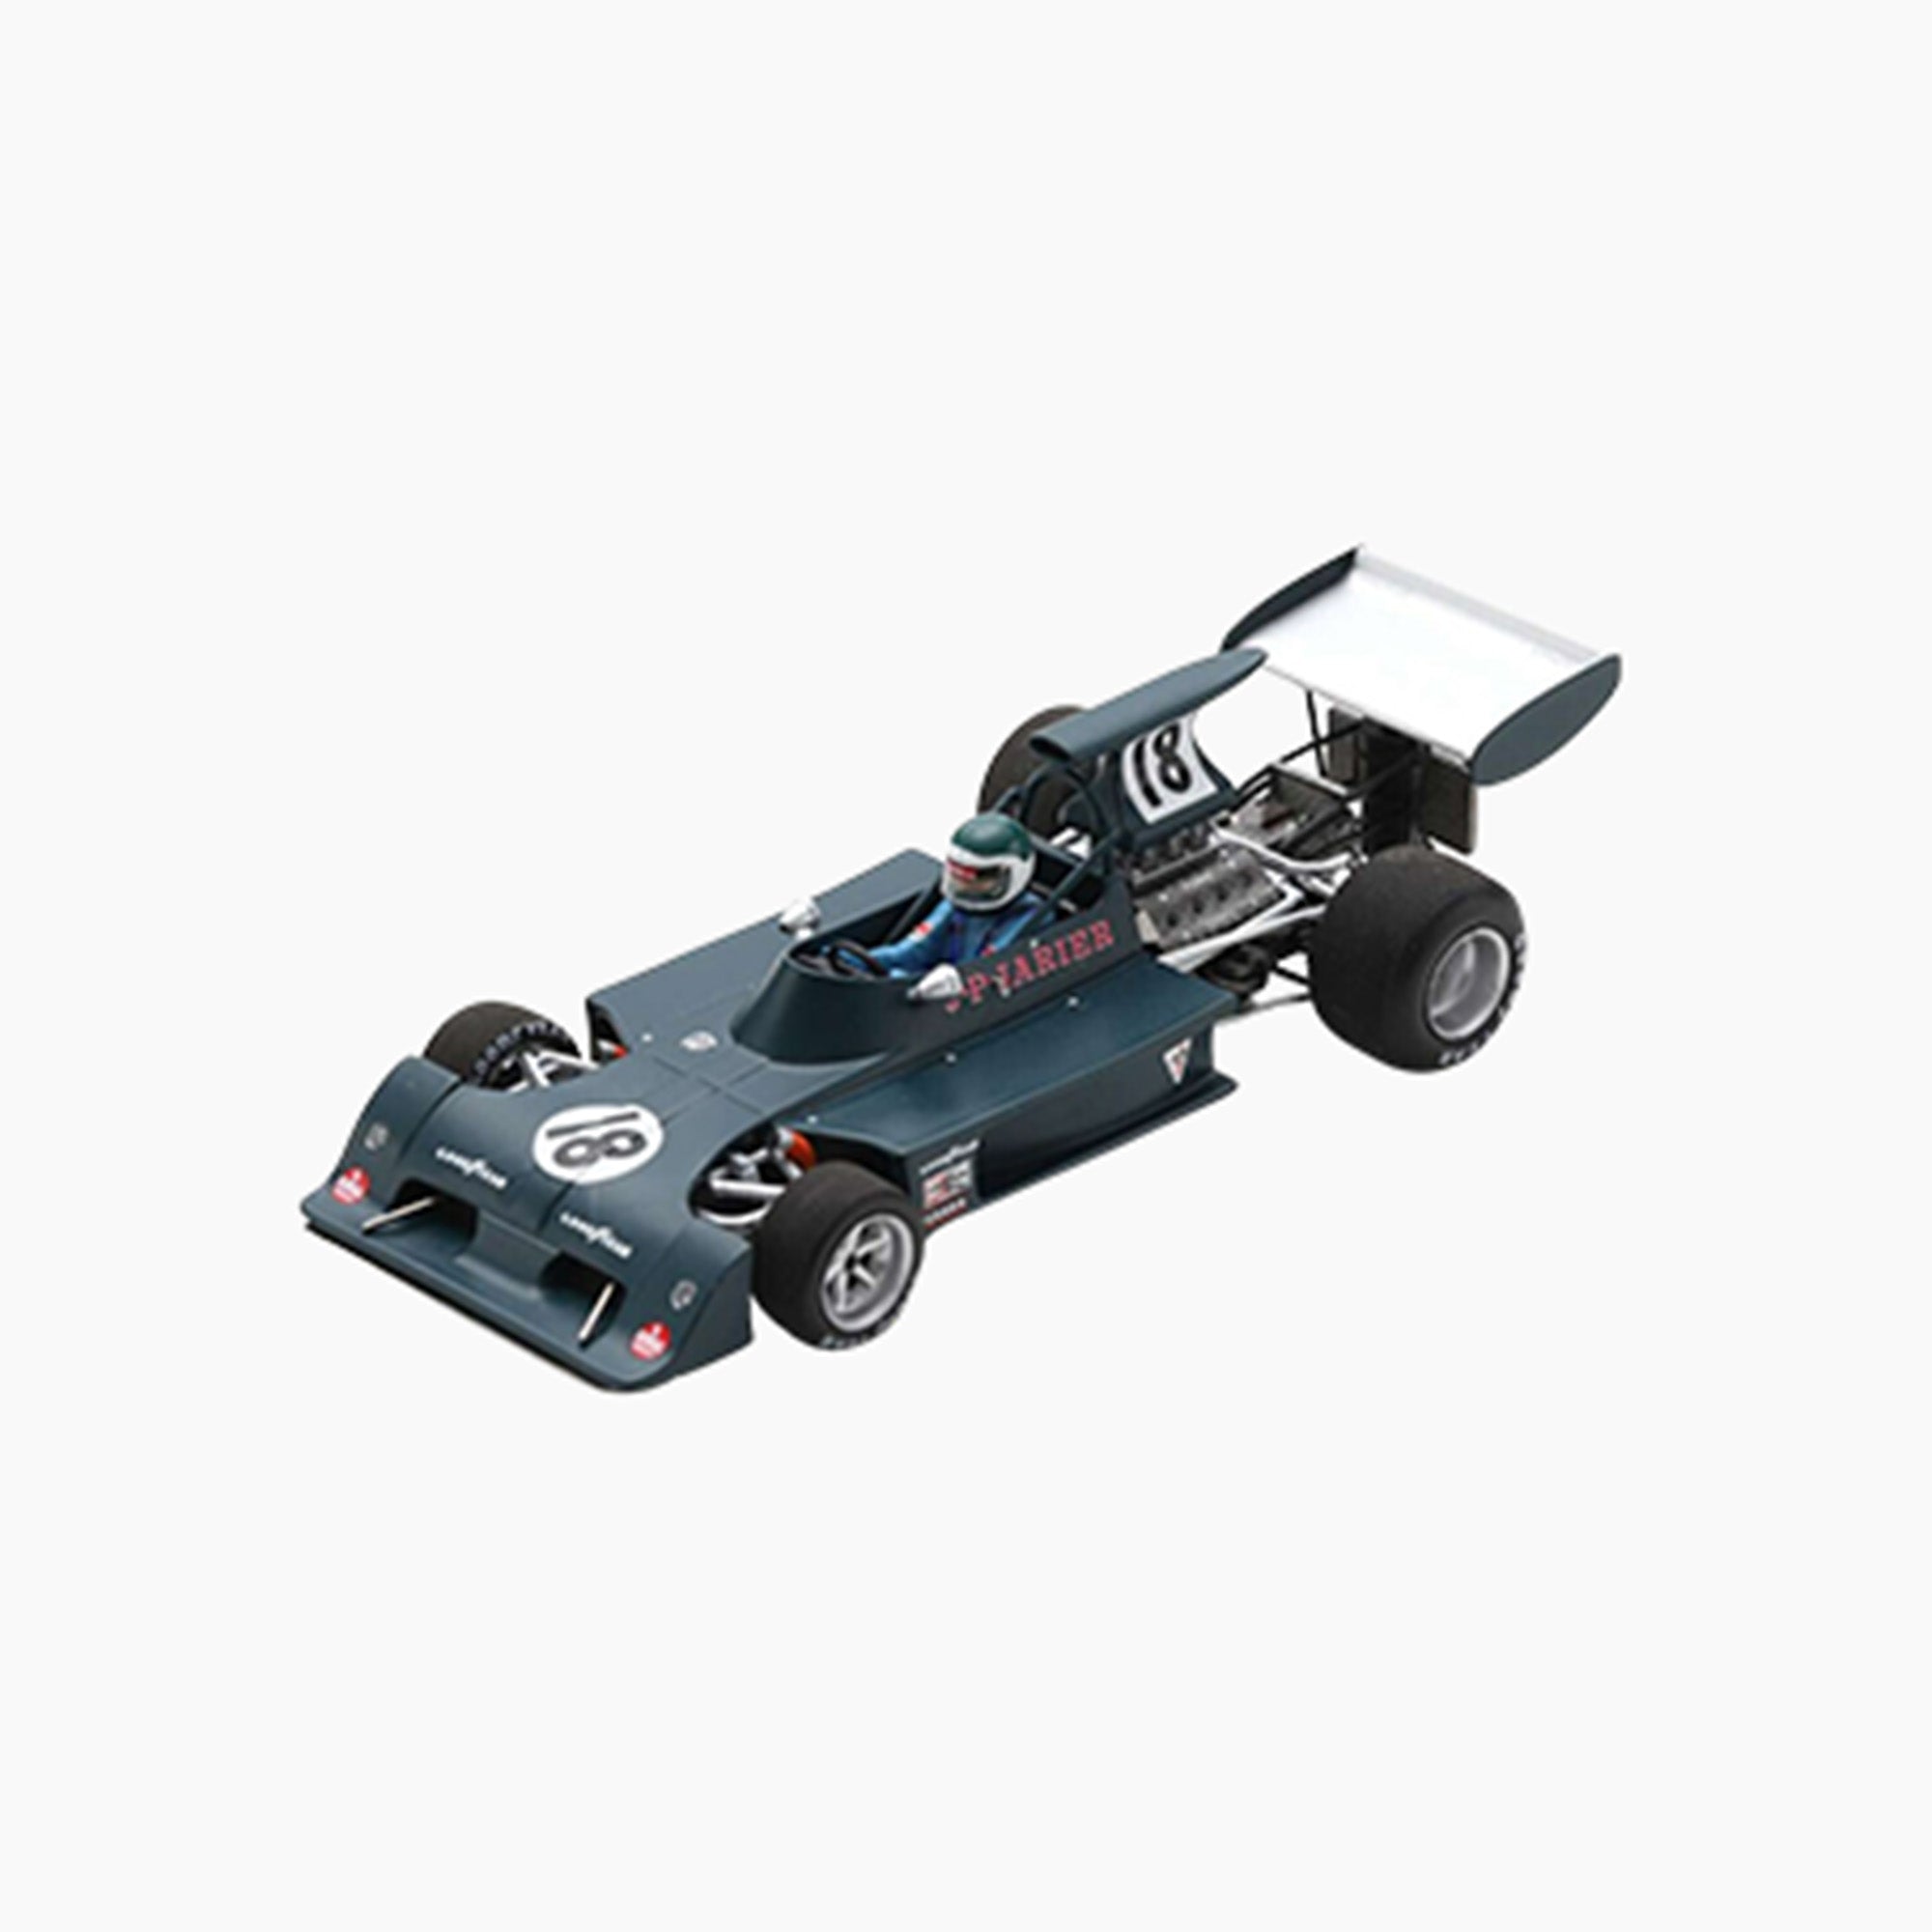 March 731 n°18 US GP 1973 | 1:43 Scale Model-1:43 Scale Model-Spark Models-gpx-store